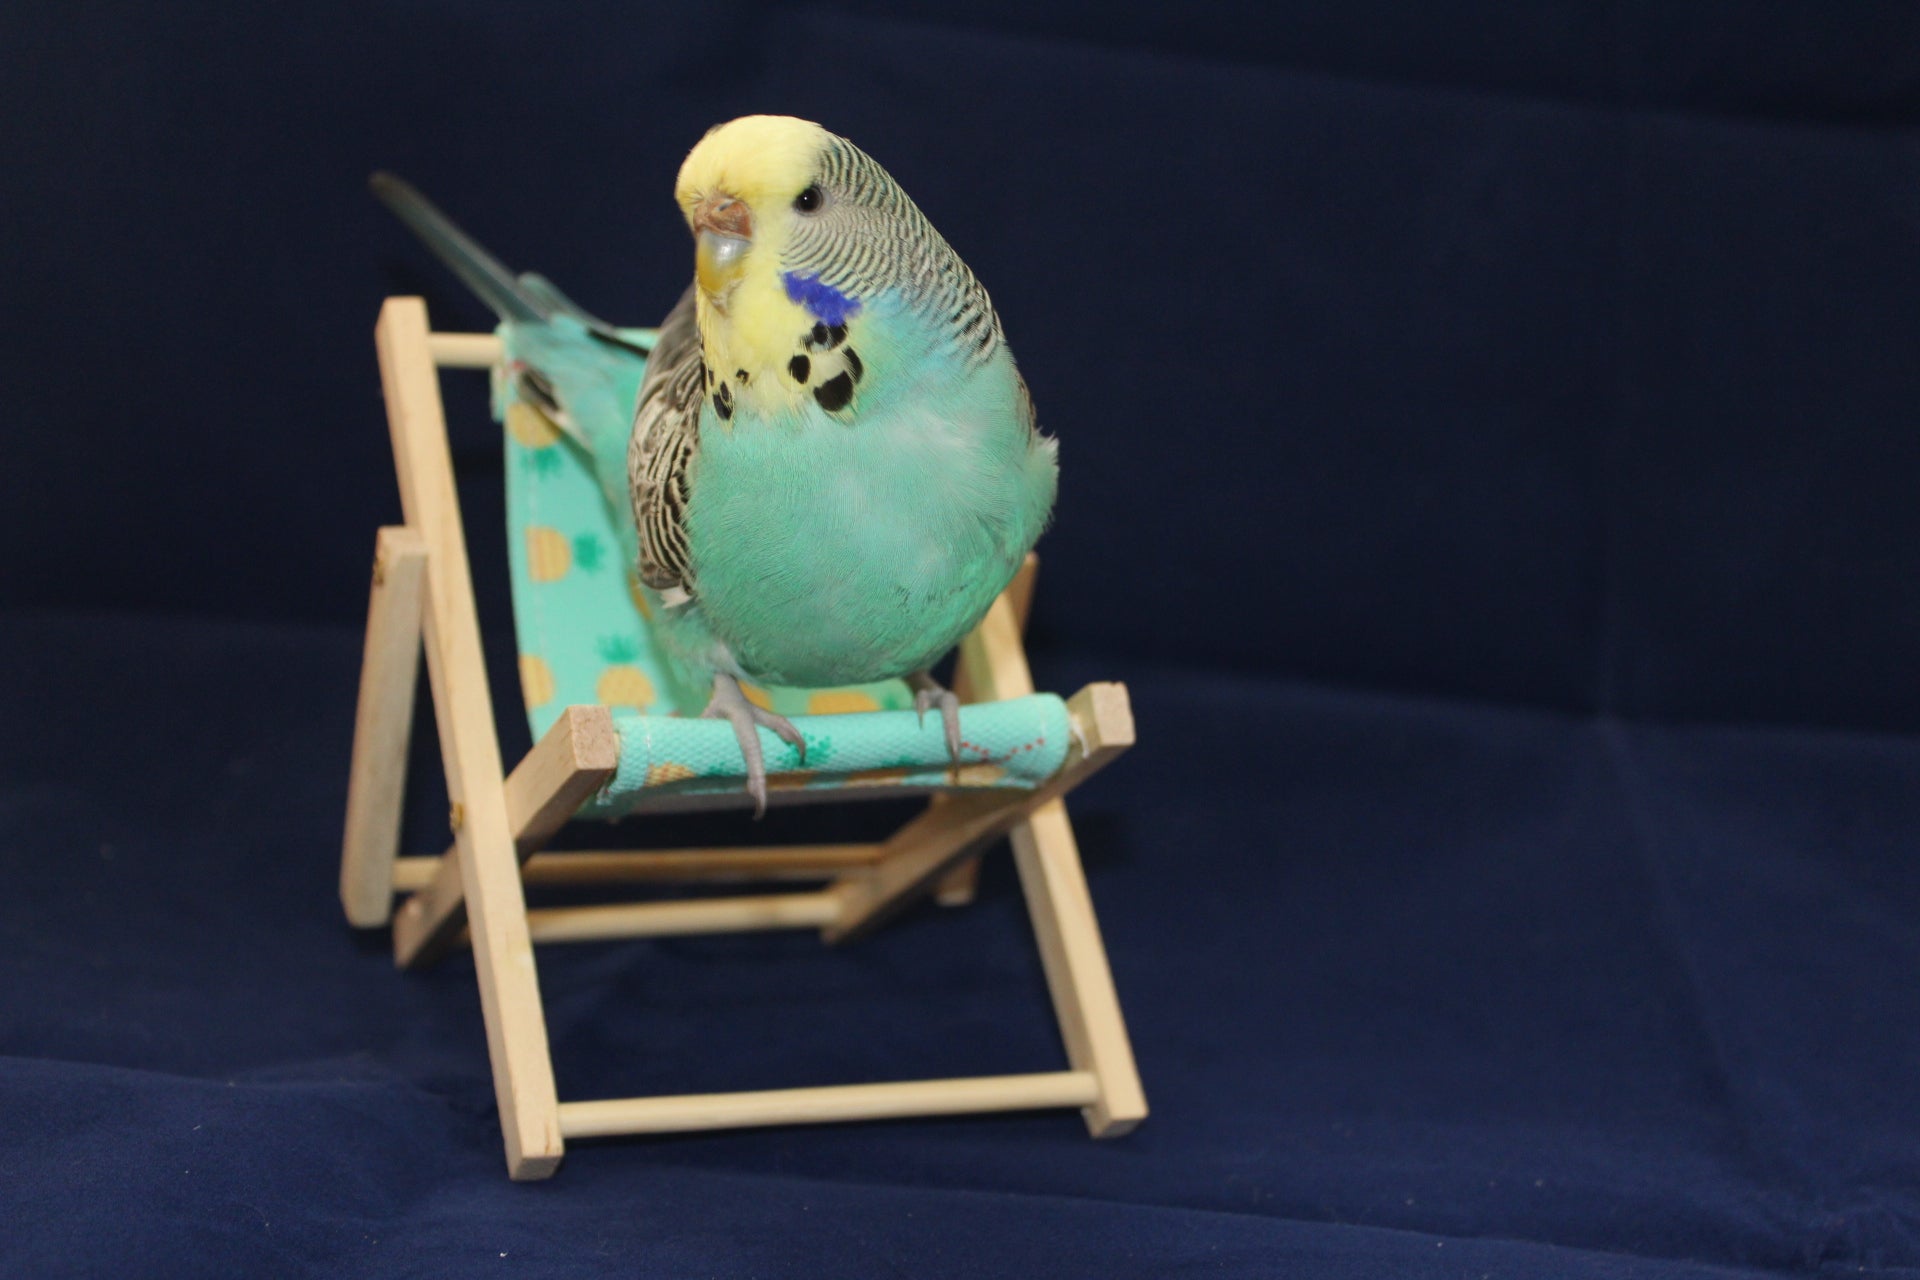 Budgie on a small deck chair